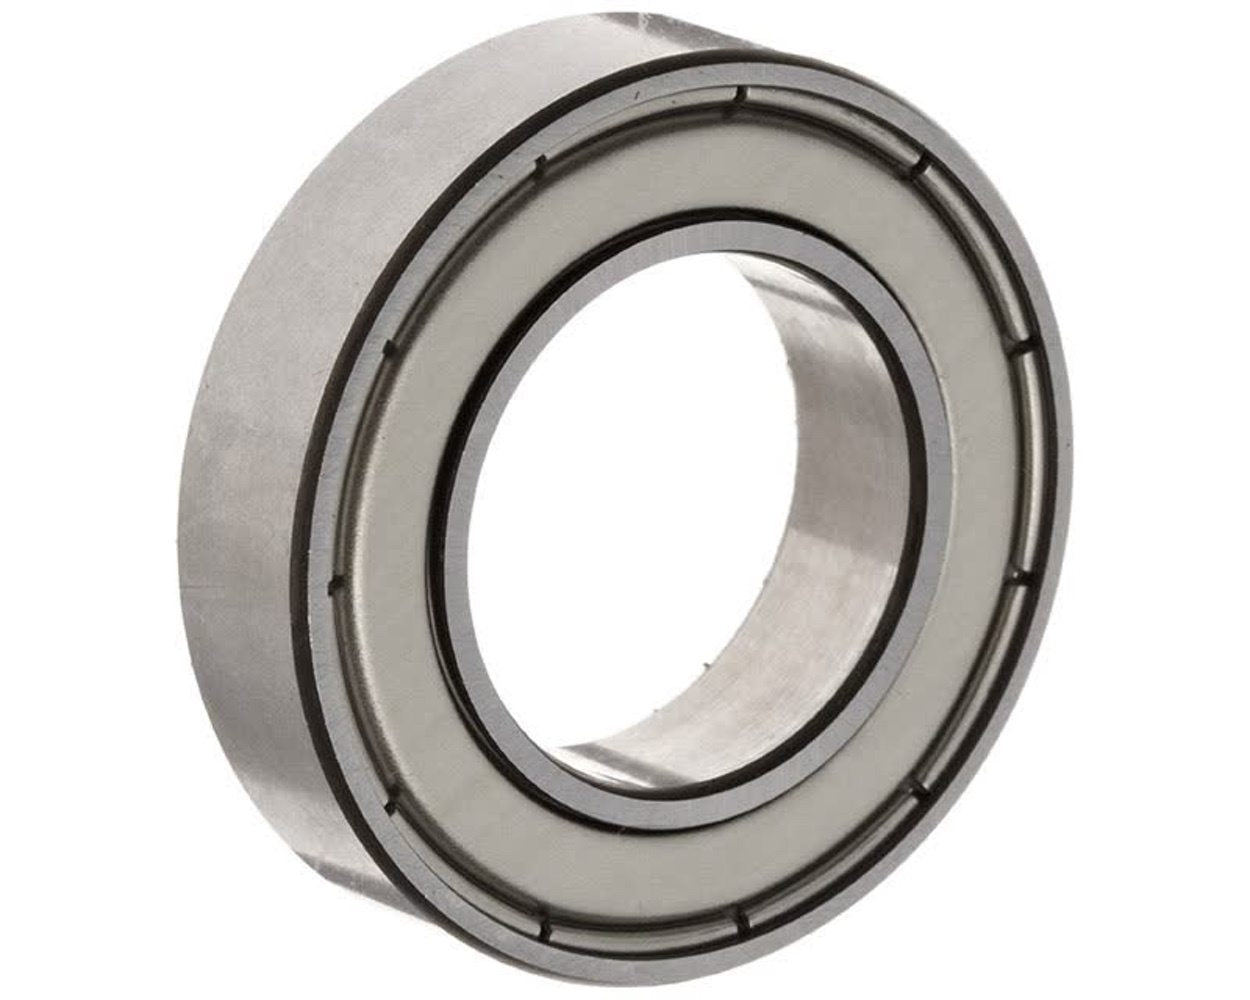 Front Wheel Bearing 6903ZZ (17mm x 30mm x 7mm) For Comer, Wright & Synergy Spoked Wheels